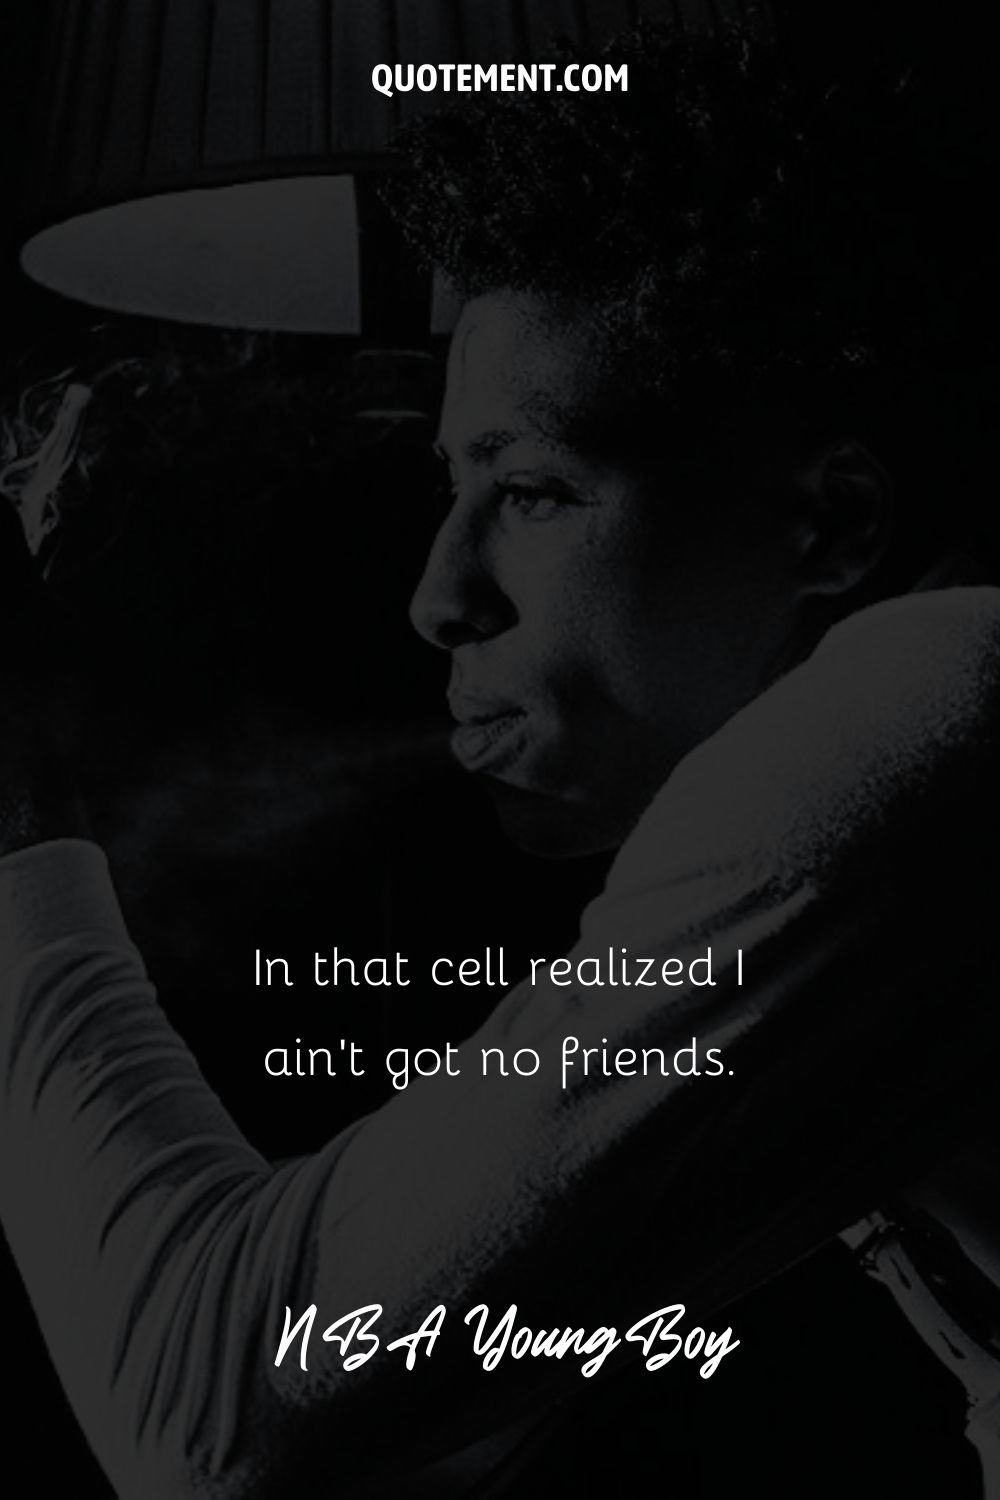 “In that cell realized I ain’t got no friends.” – NBA YoungBoy, “Dark Into Light”